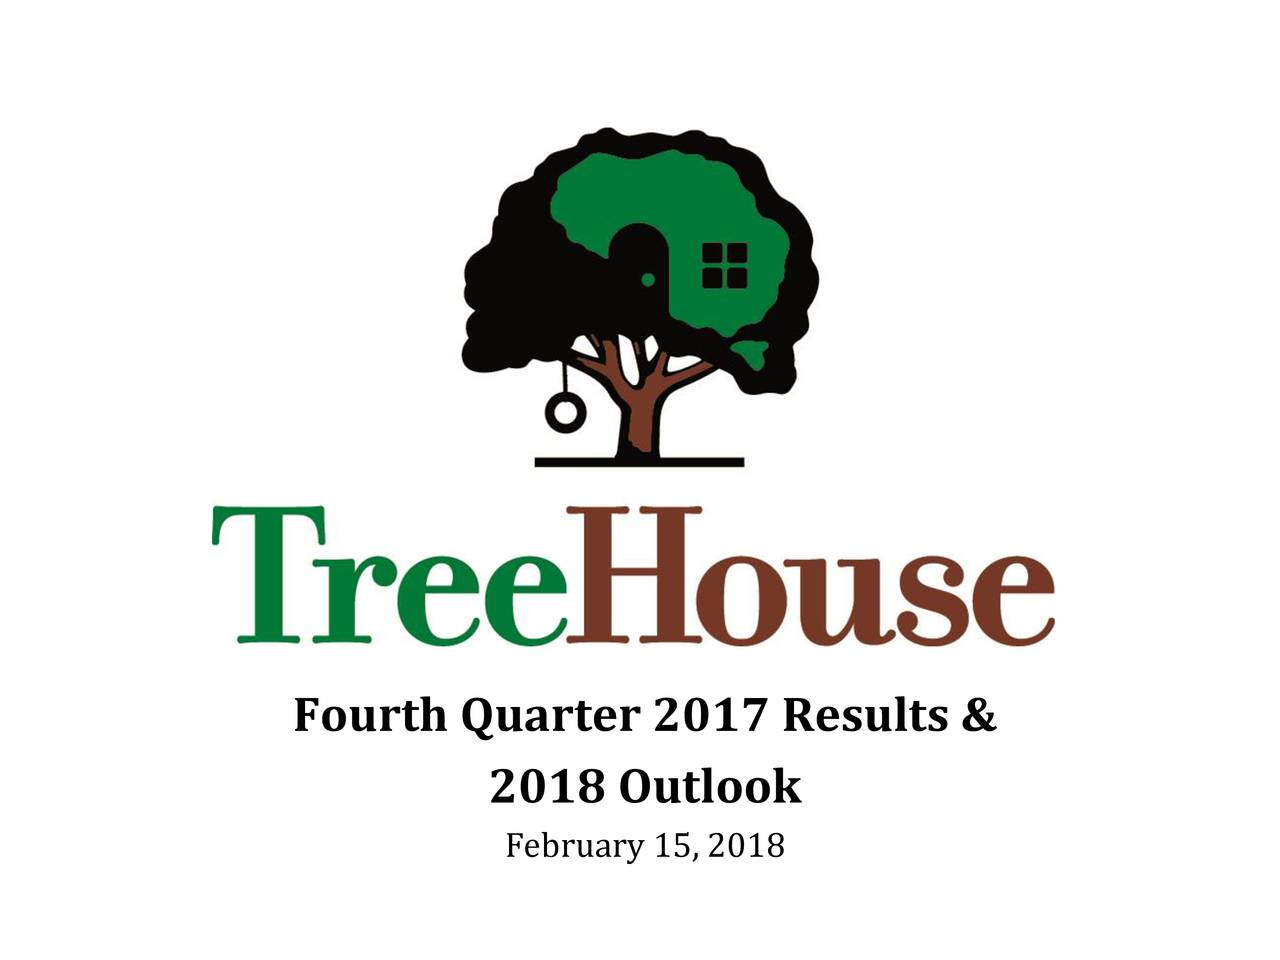 TreeHouse Foods, Inc. 2017 Q4  Results  Earnings Call Slides  TreeHouse Foods, Inc. NYSE:THS 